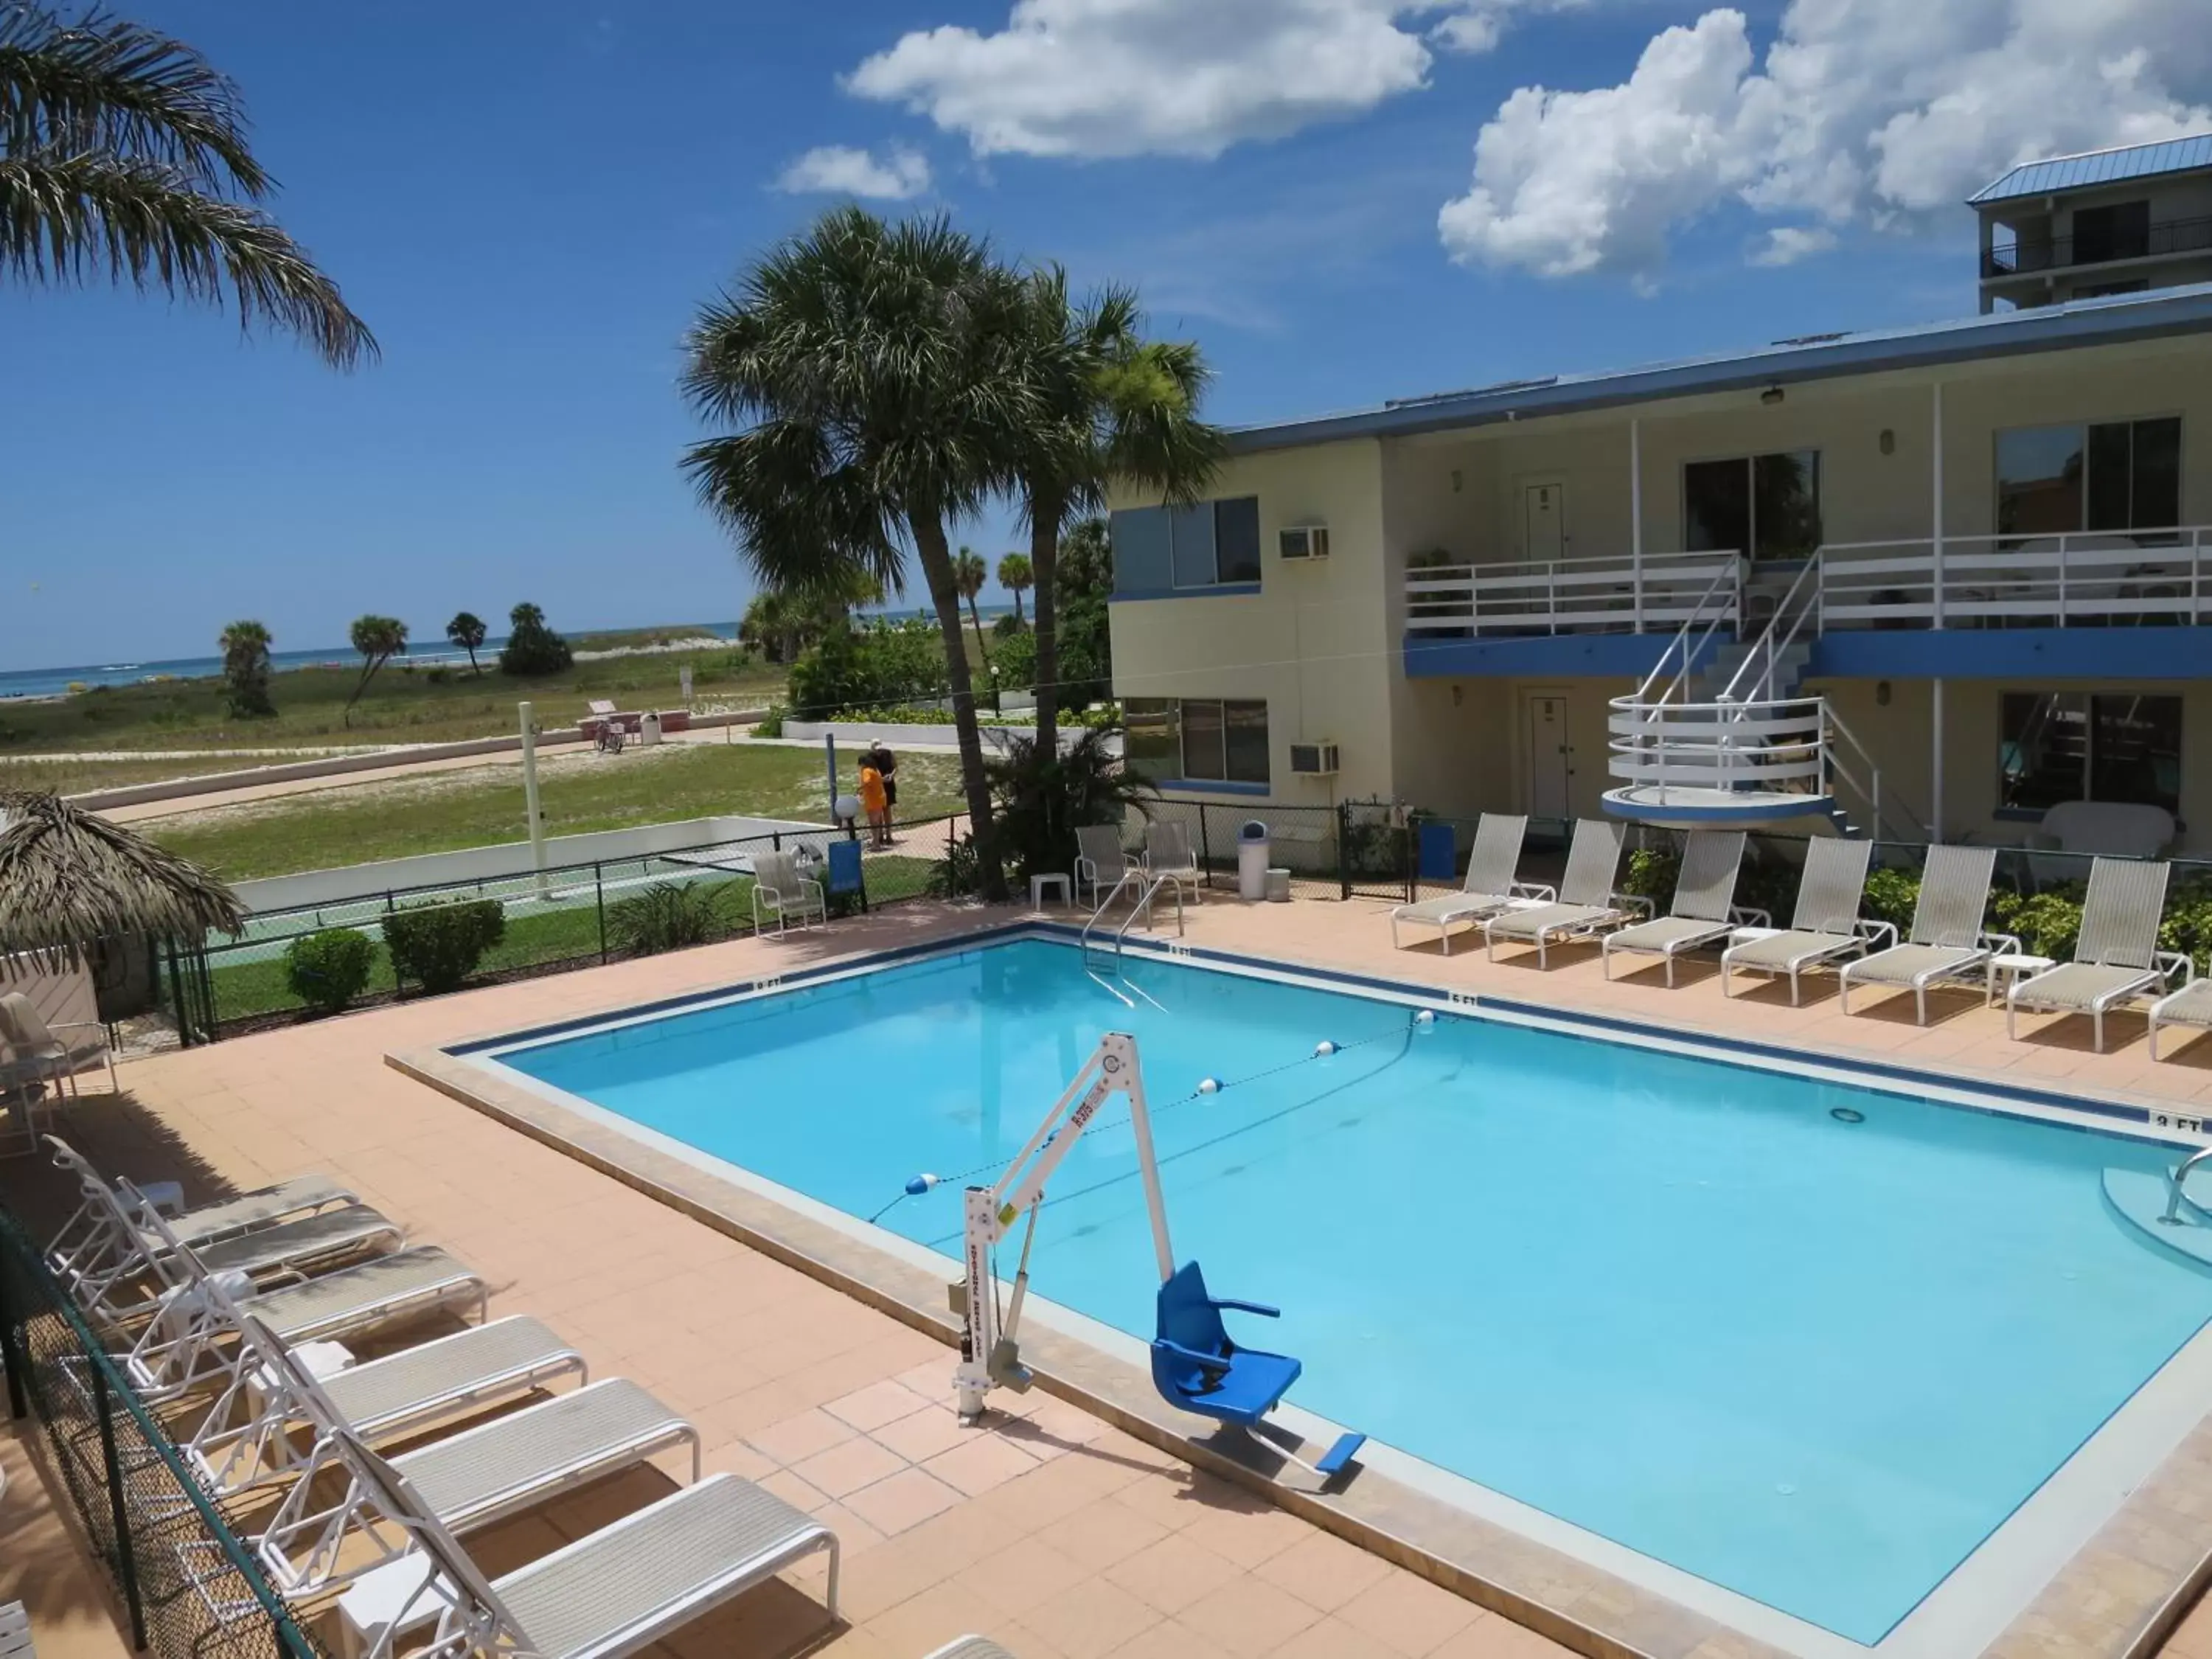 Property building, Swimming Pool in Arvilla Motel